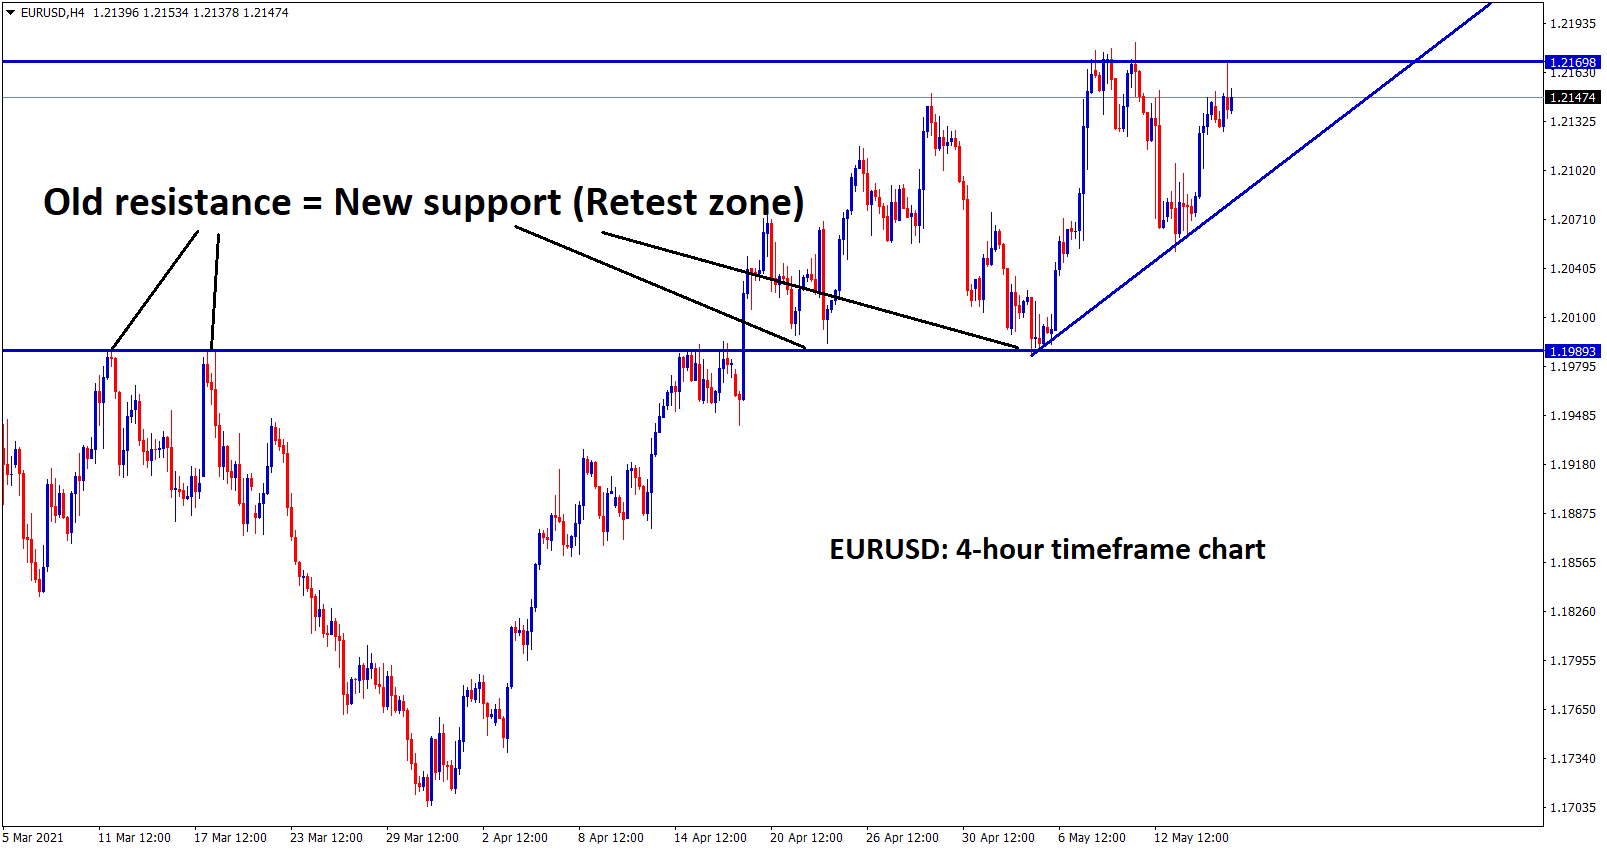 EURUSD forming an Ascending Triangle after bouncing back from the retest zone.